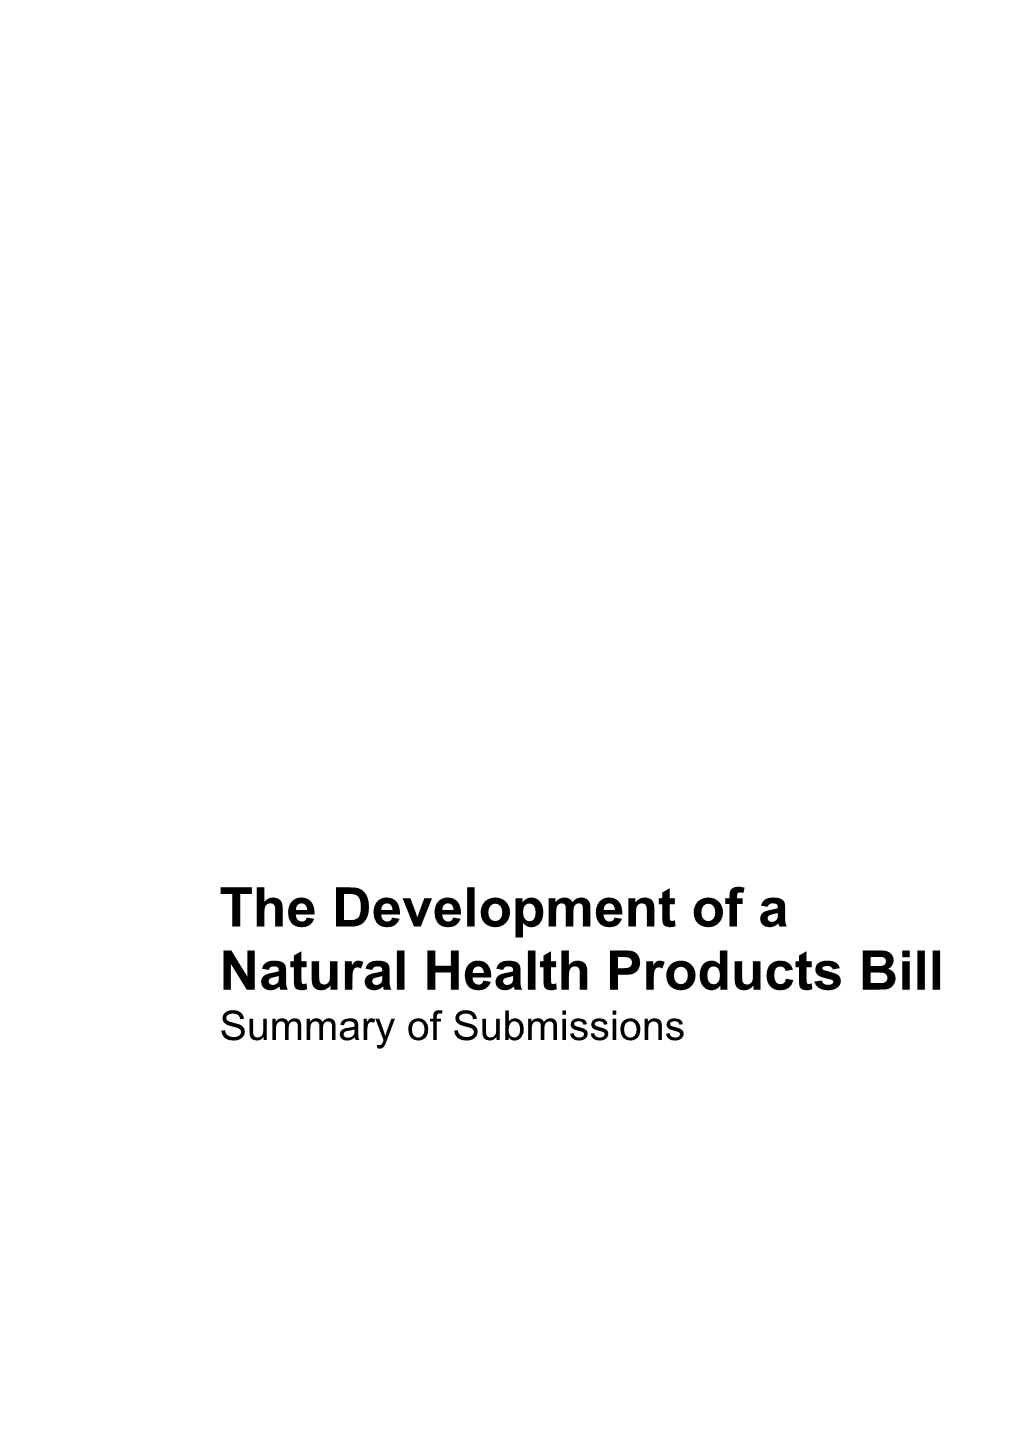 The Development of a Natural Health Products Bill